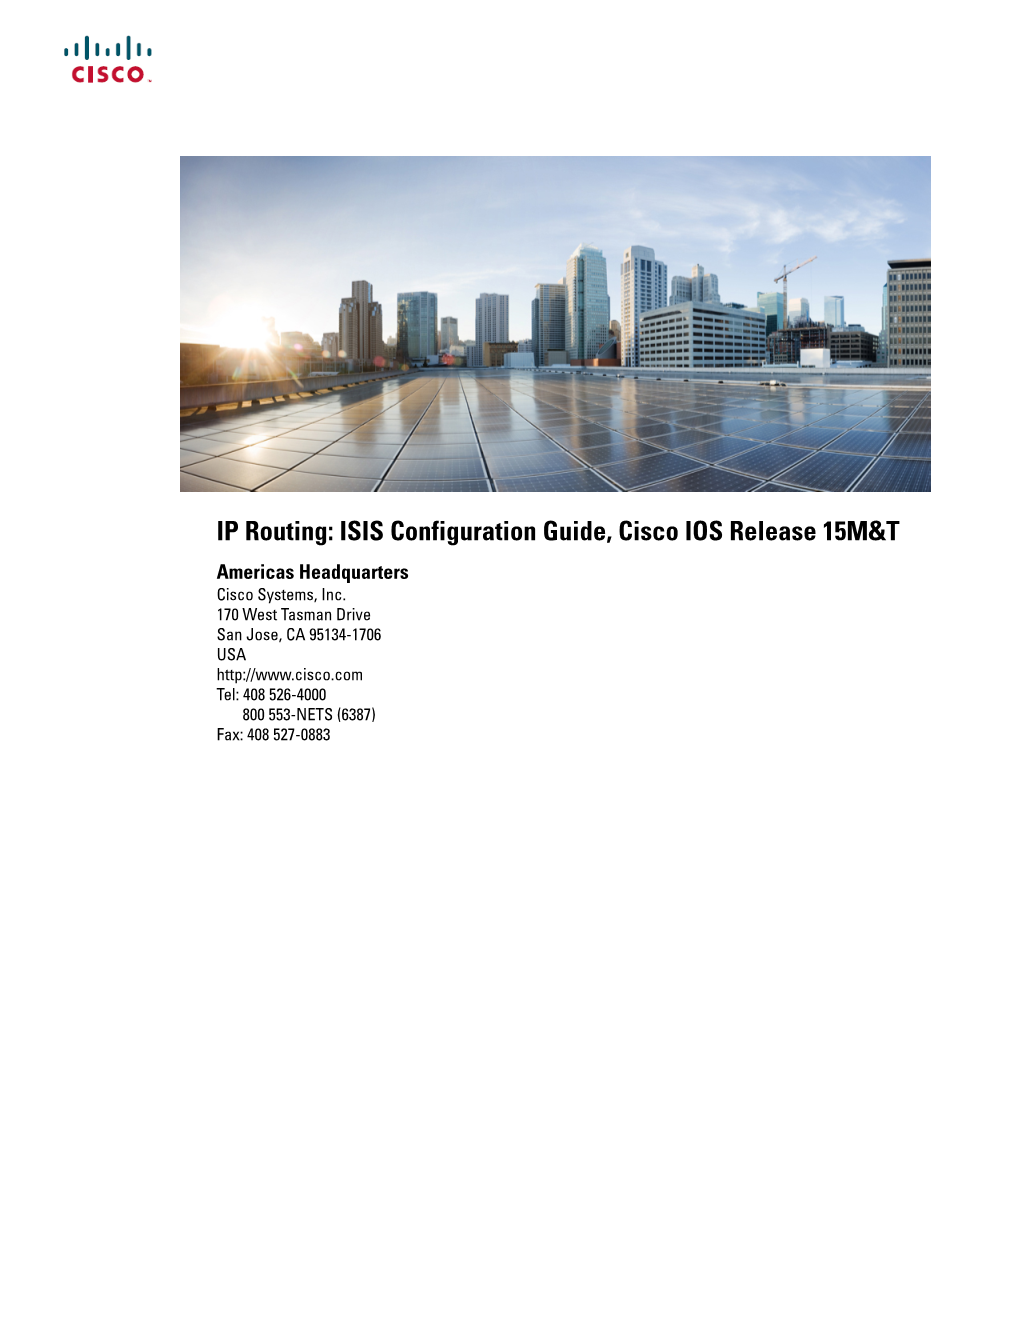 IP Routing: ISIS Configuration Guide, Cisco IOS Release 15M&T